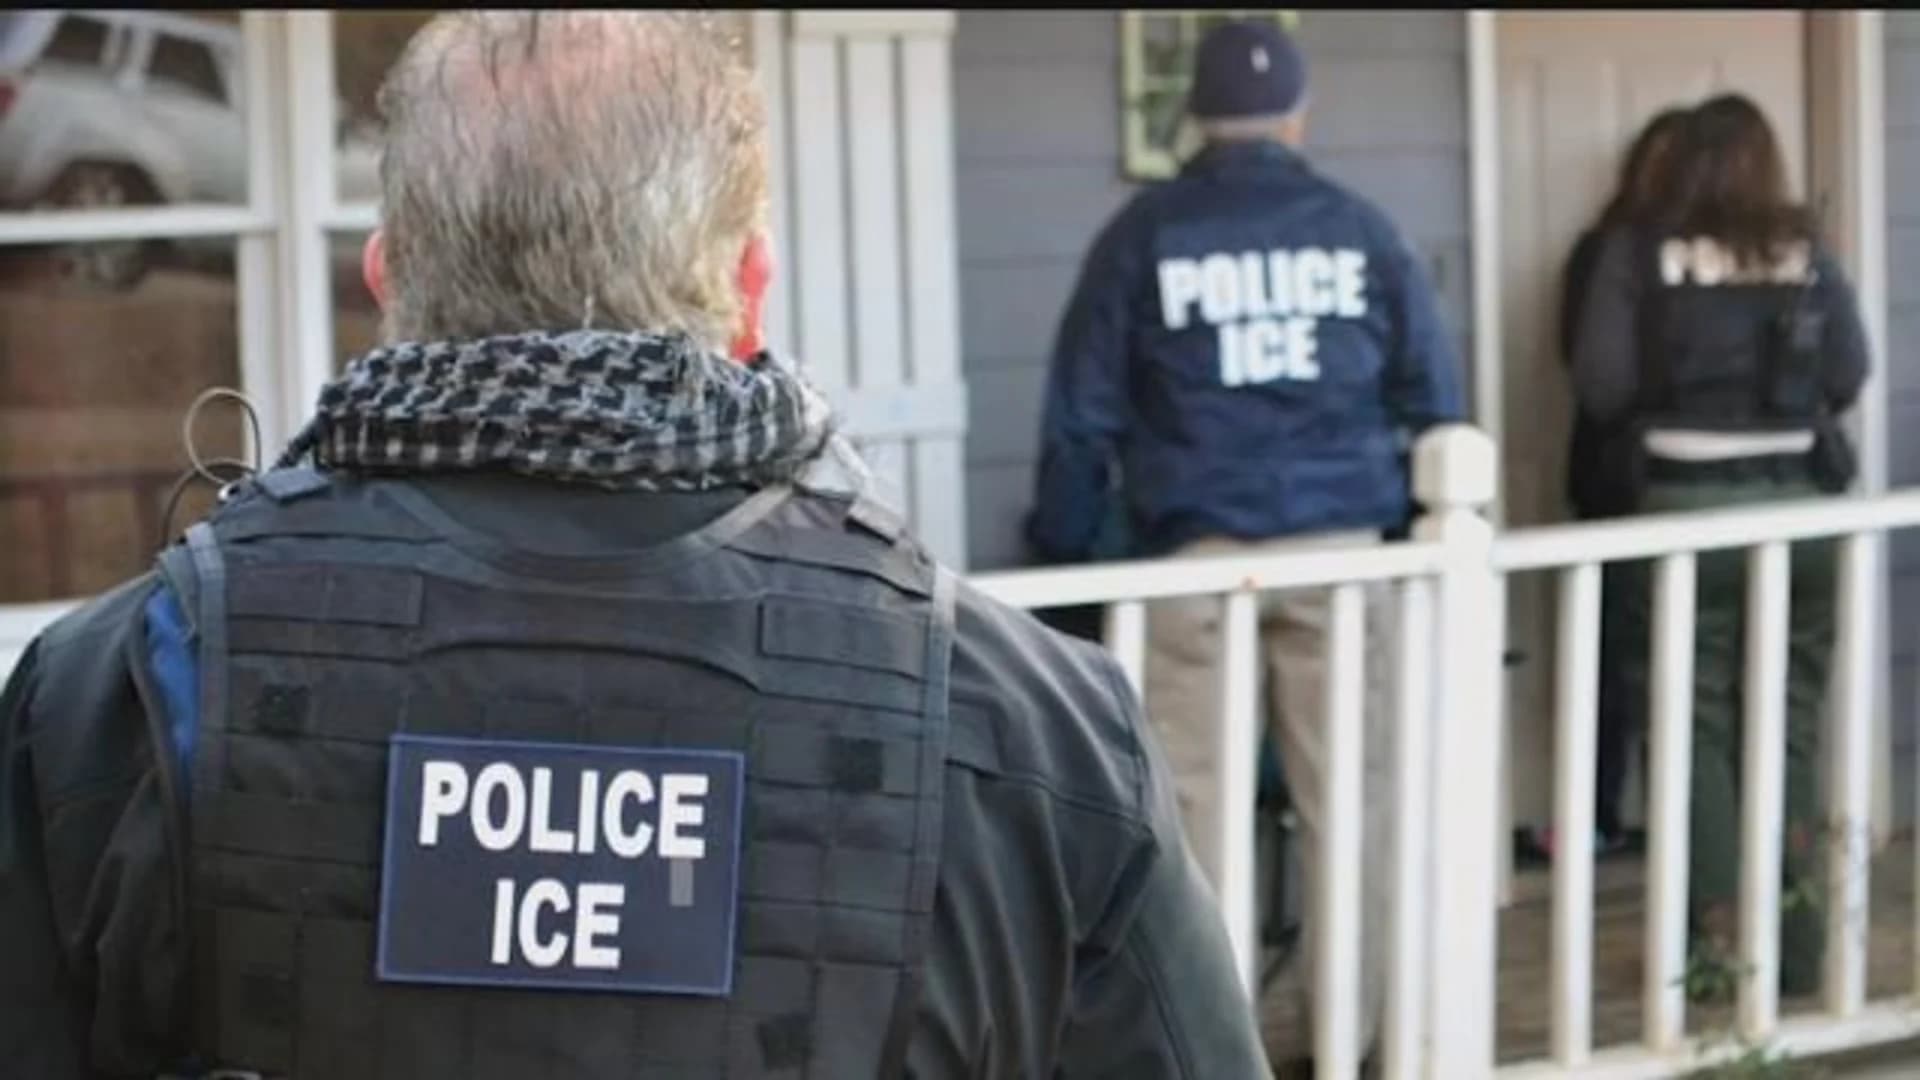 State police departments push back against report claiming they aid ICE